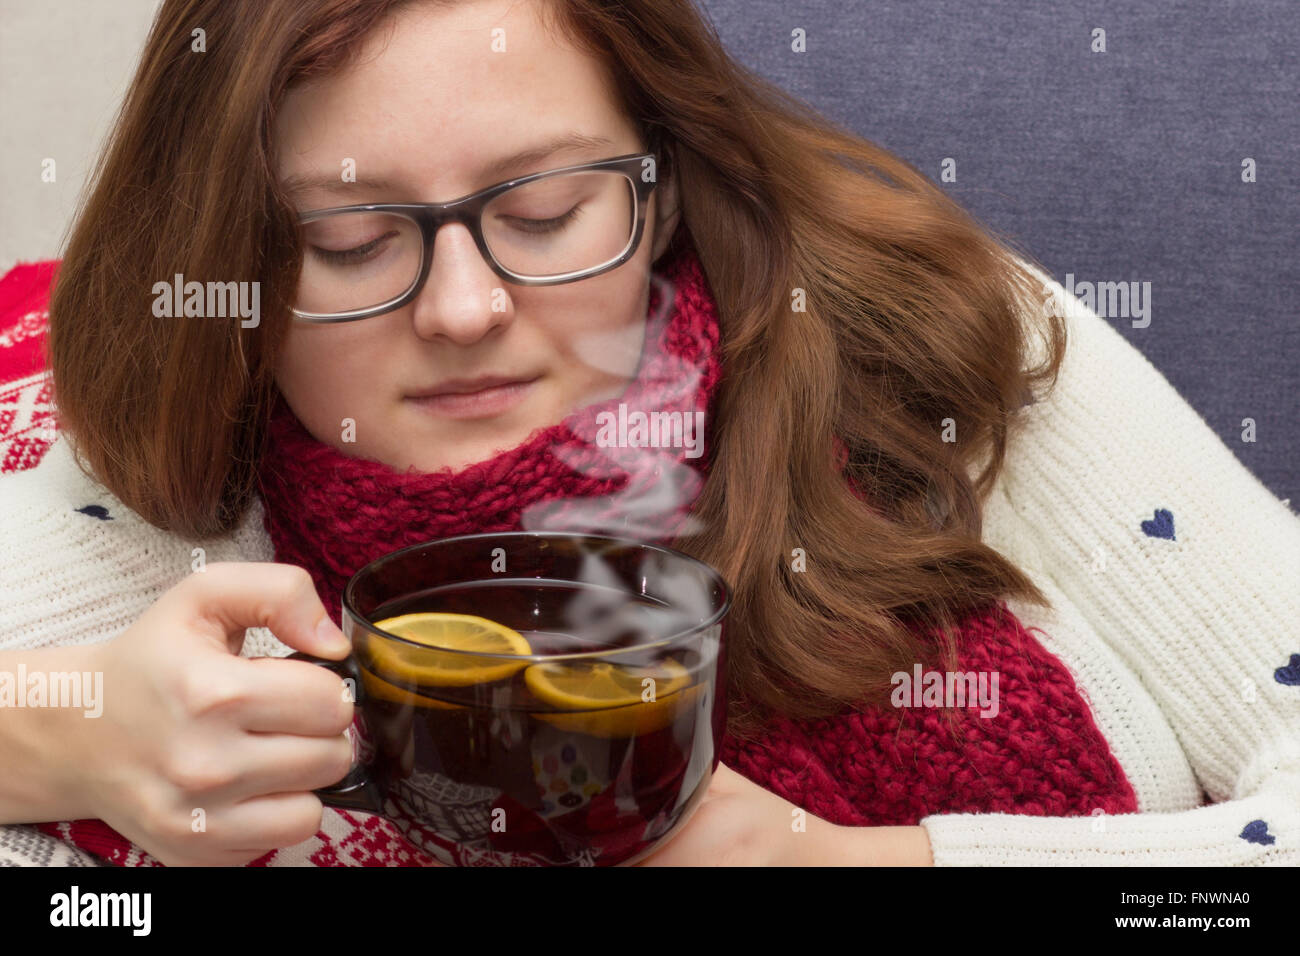 Sick woman wearing scarf Lying in Bed drinking tea Banque D'Images